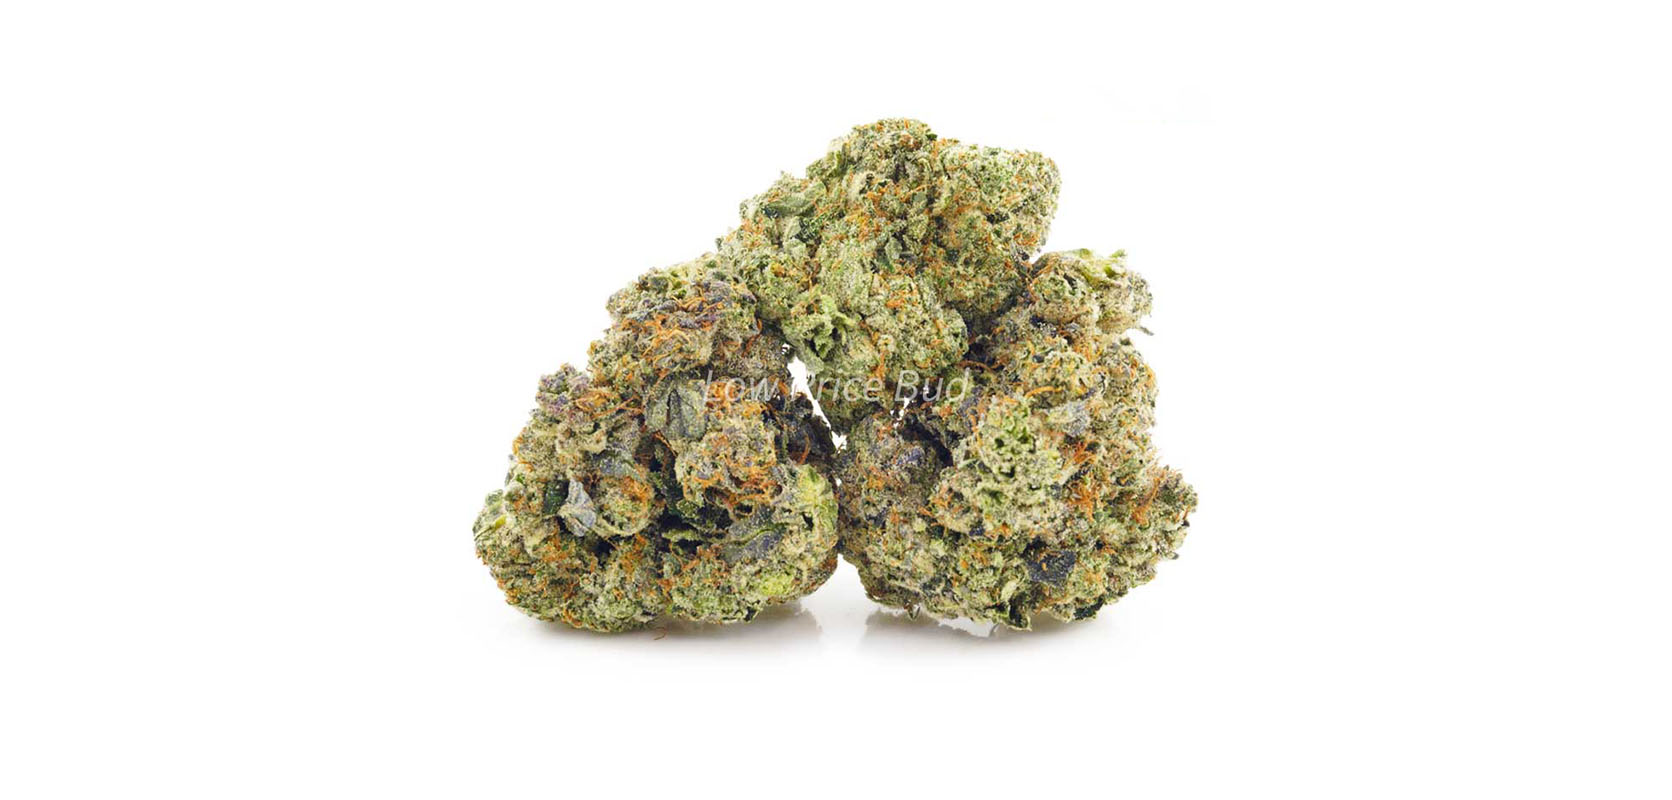 Astroboy weed online Canada. thc oil. budget buds. dispensary vancouver. cheap weed canada. Dispencary.